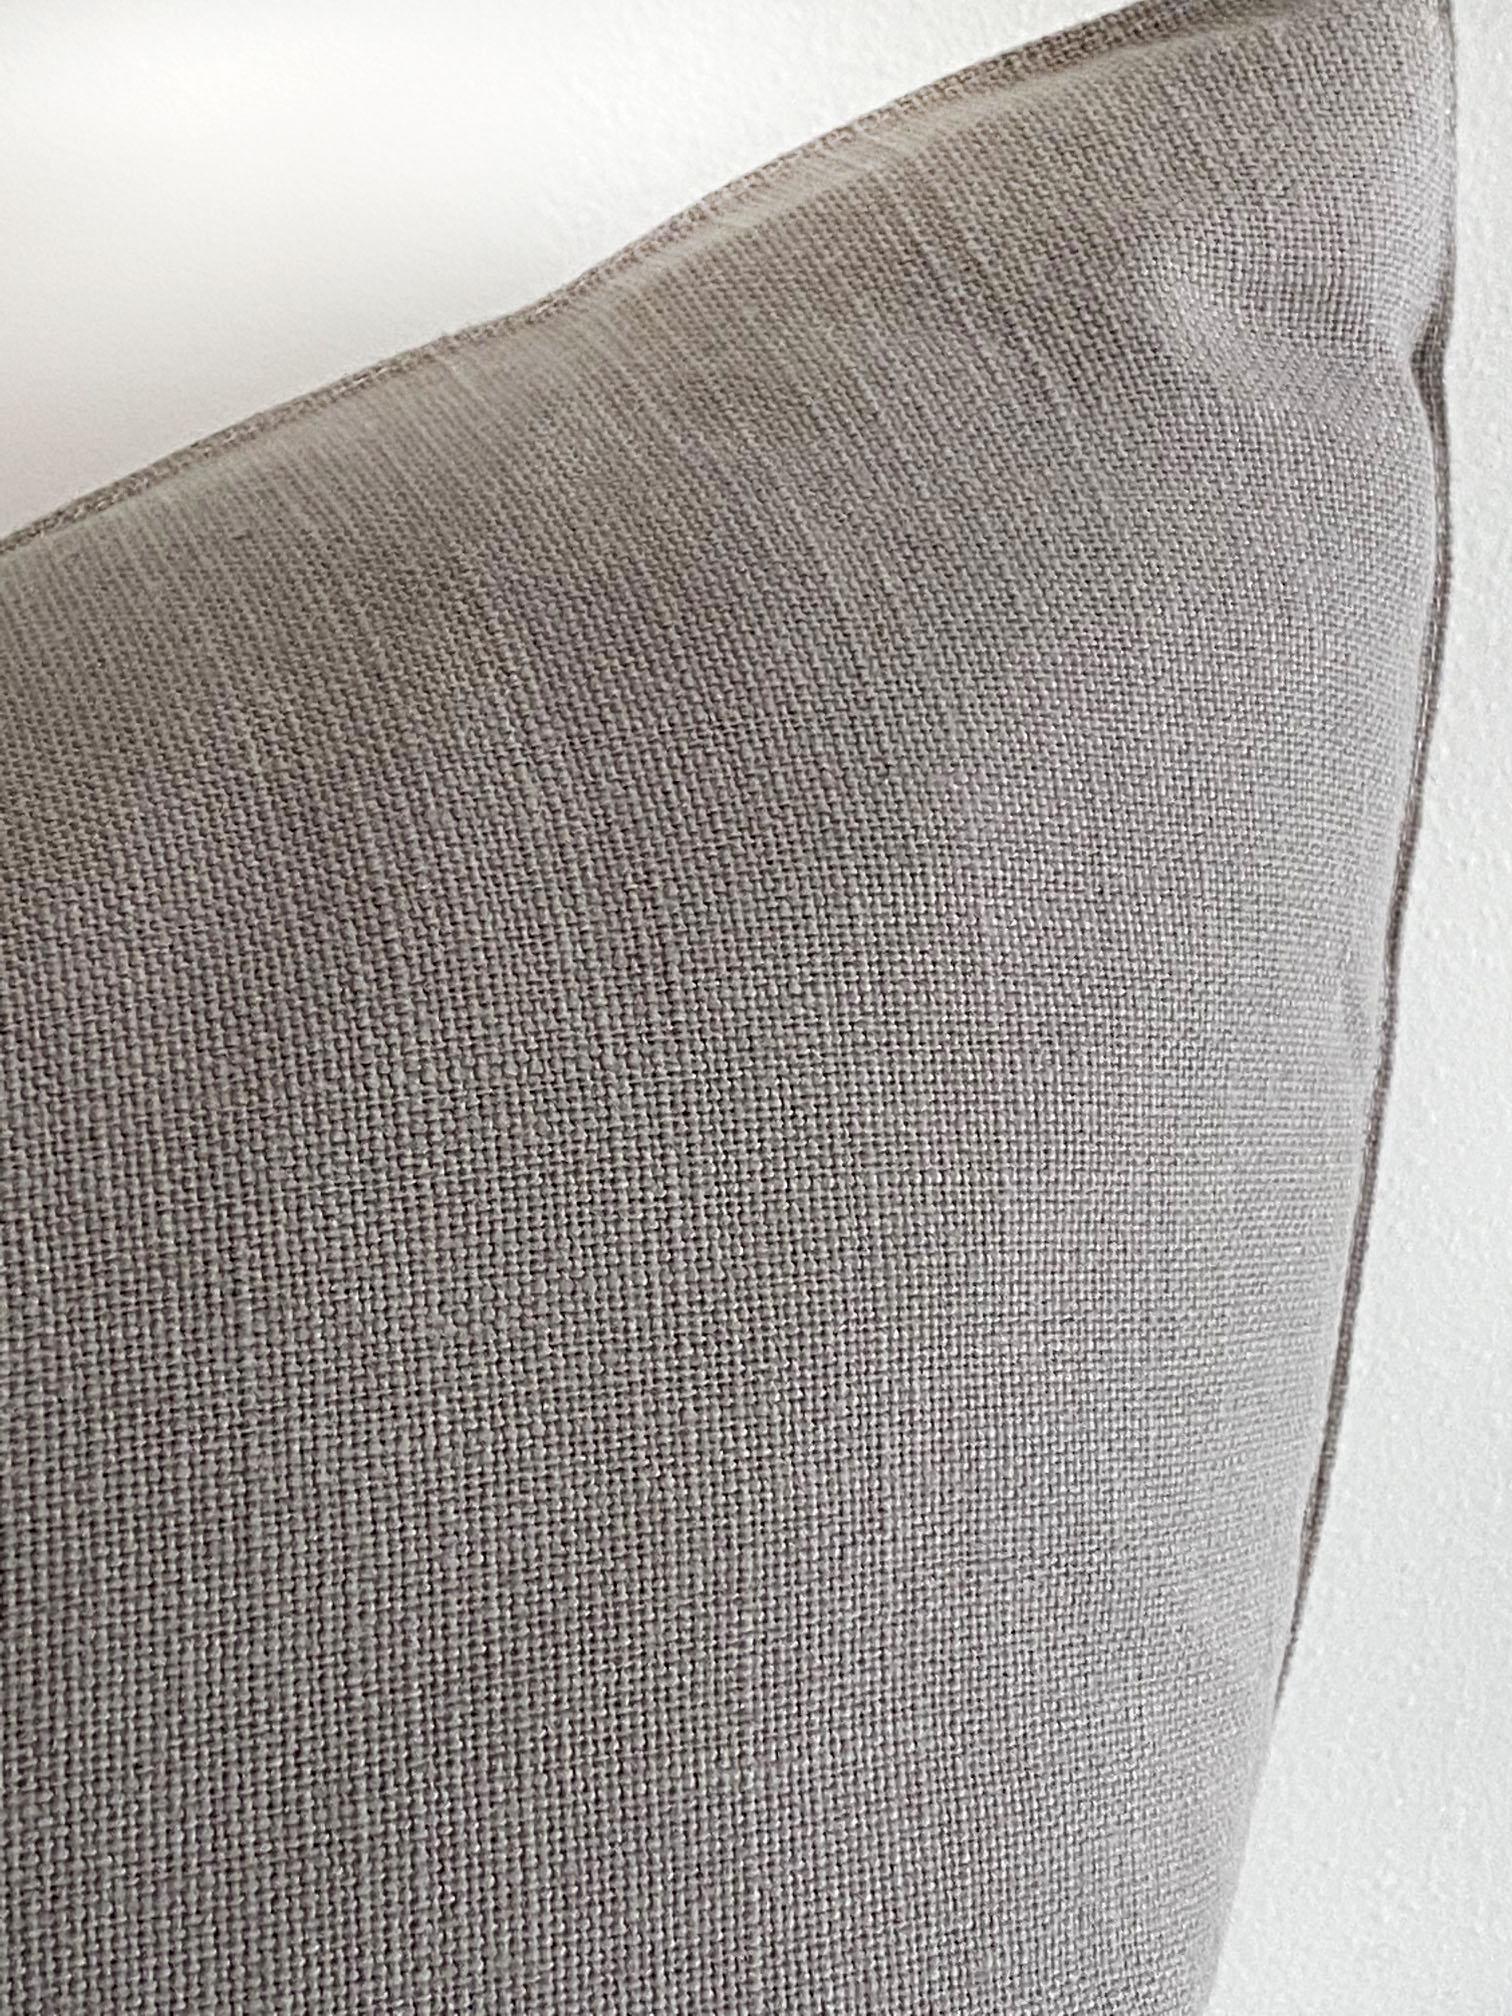 Stone gray Belgian linen accent pillow
Size: 20 x 20
Insert not included.
Envelope style closure.
  